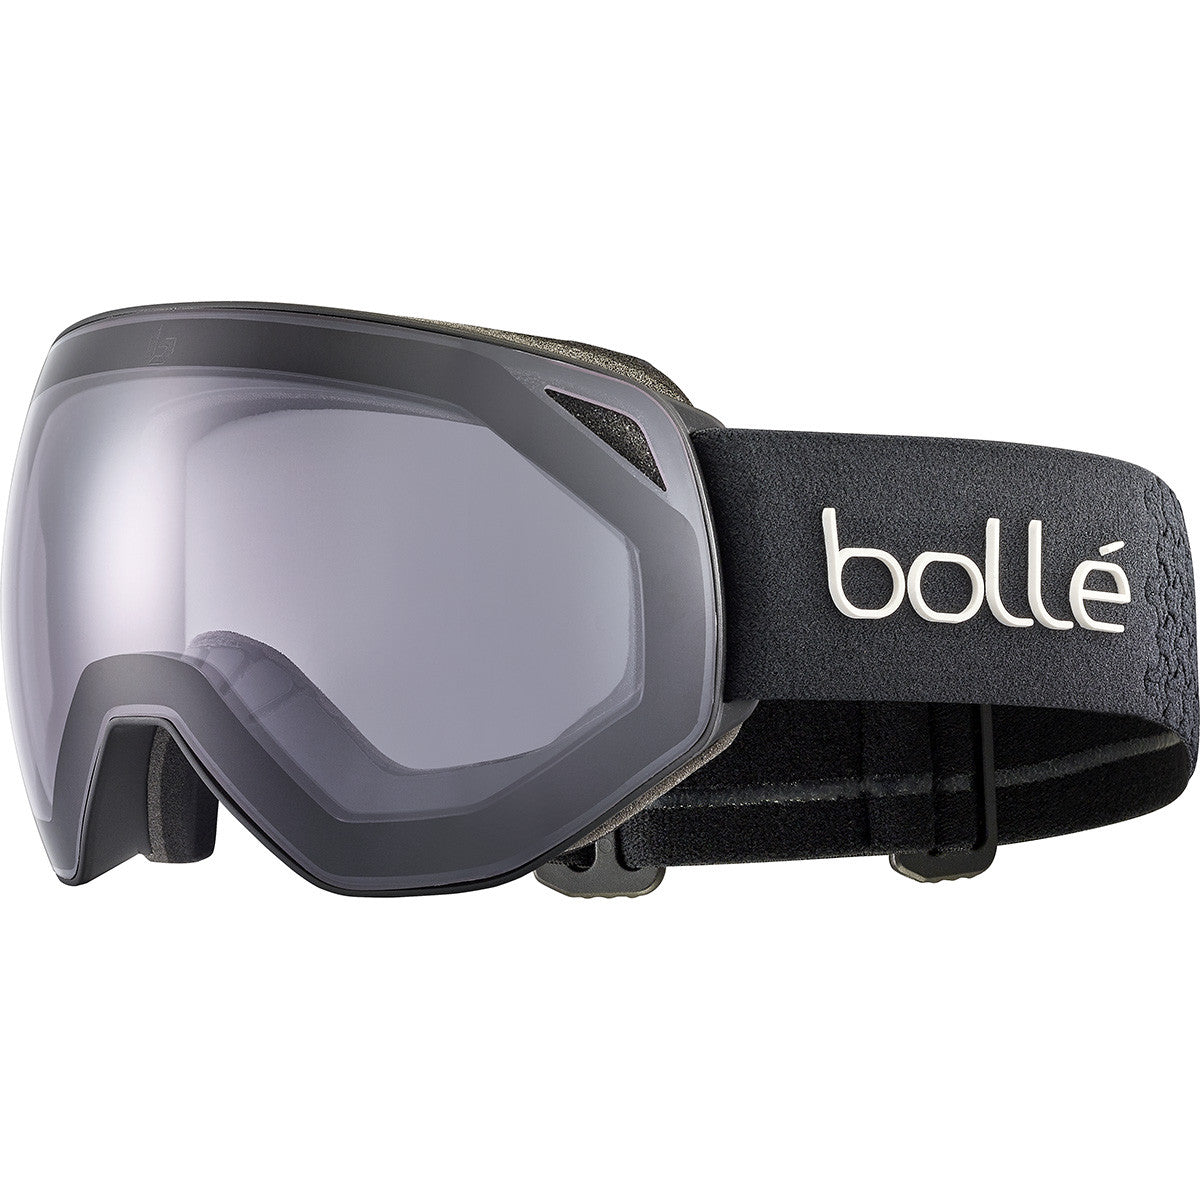 Bolle Torus Goggles  Black Matte Large One size